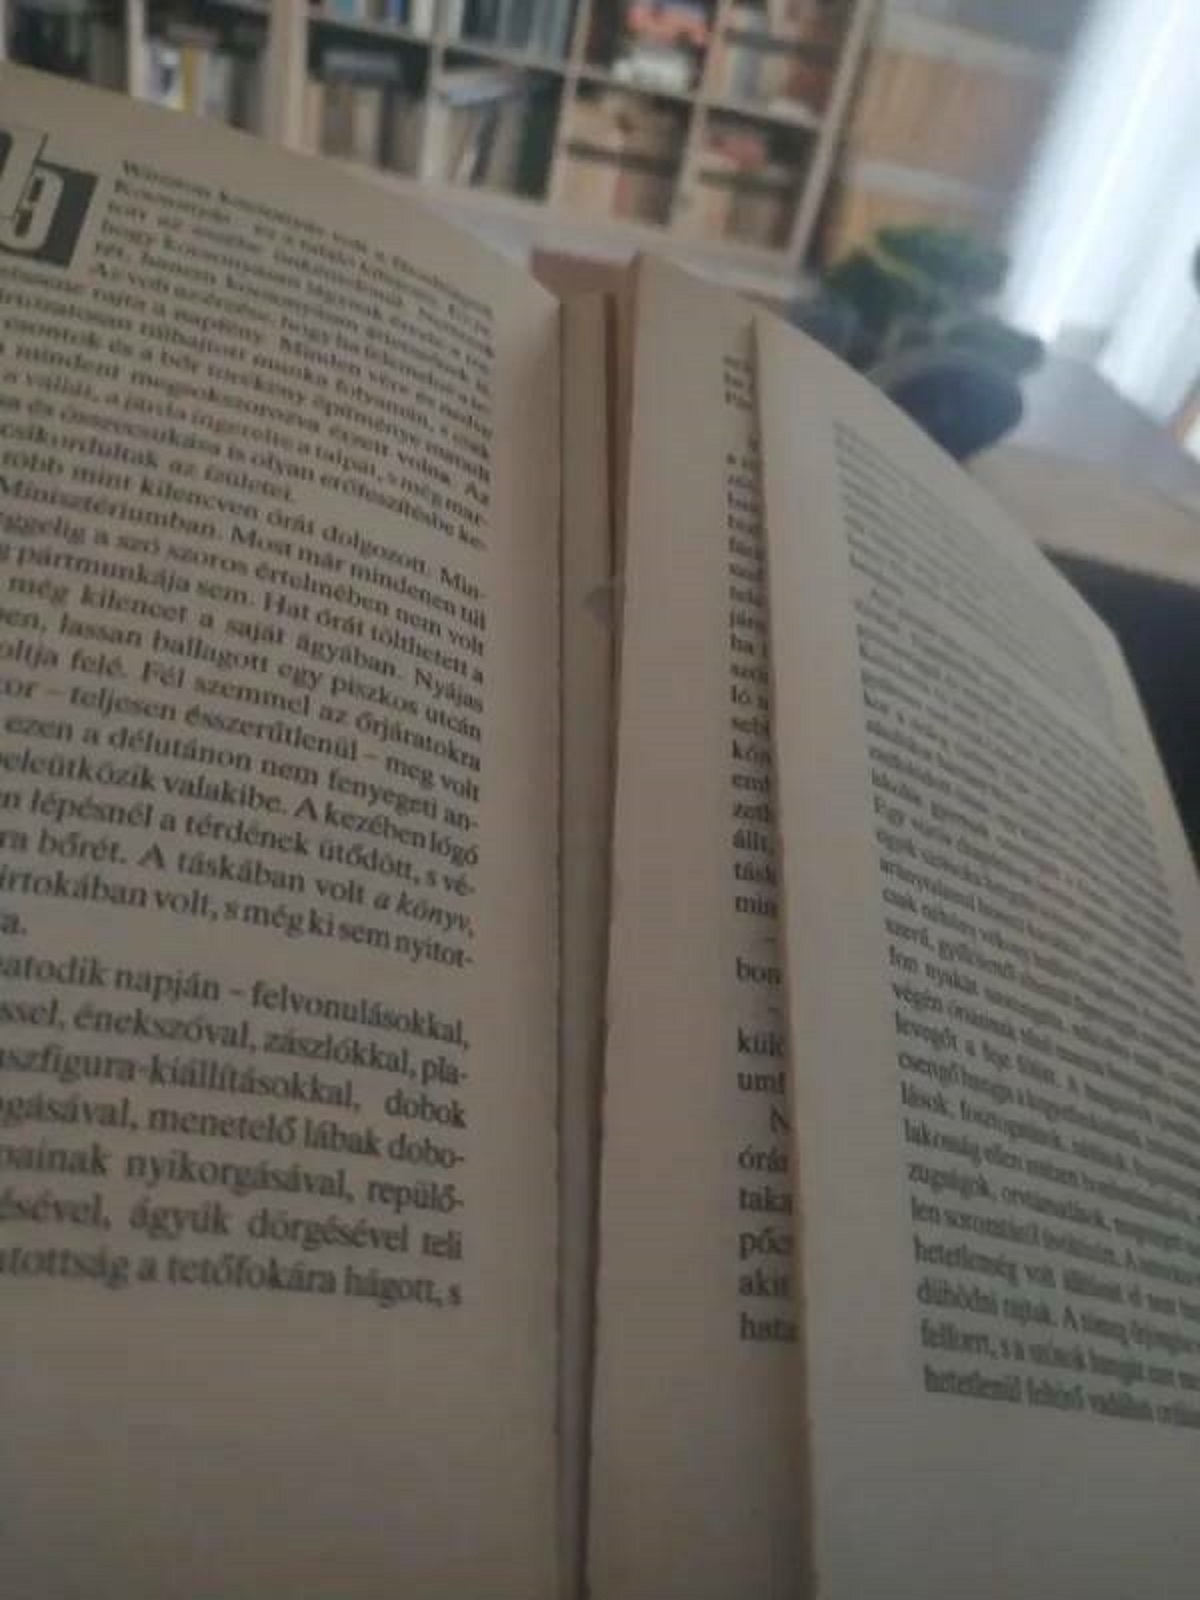 “Tried reading a book and when I broke it’s spine this happened”